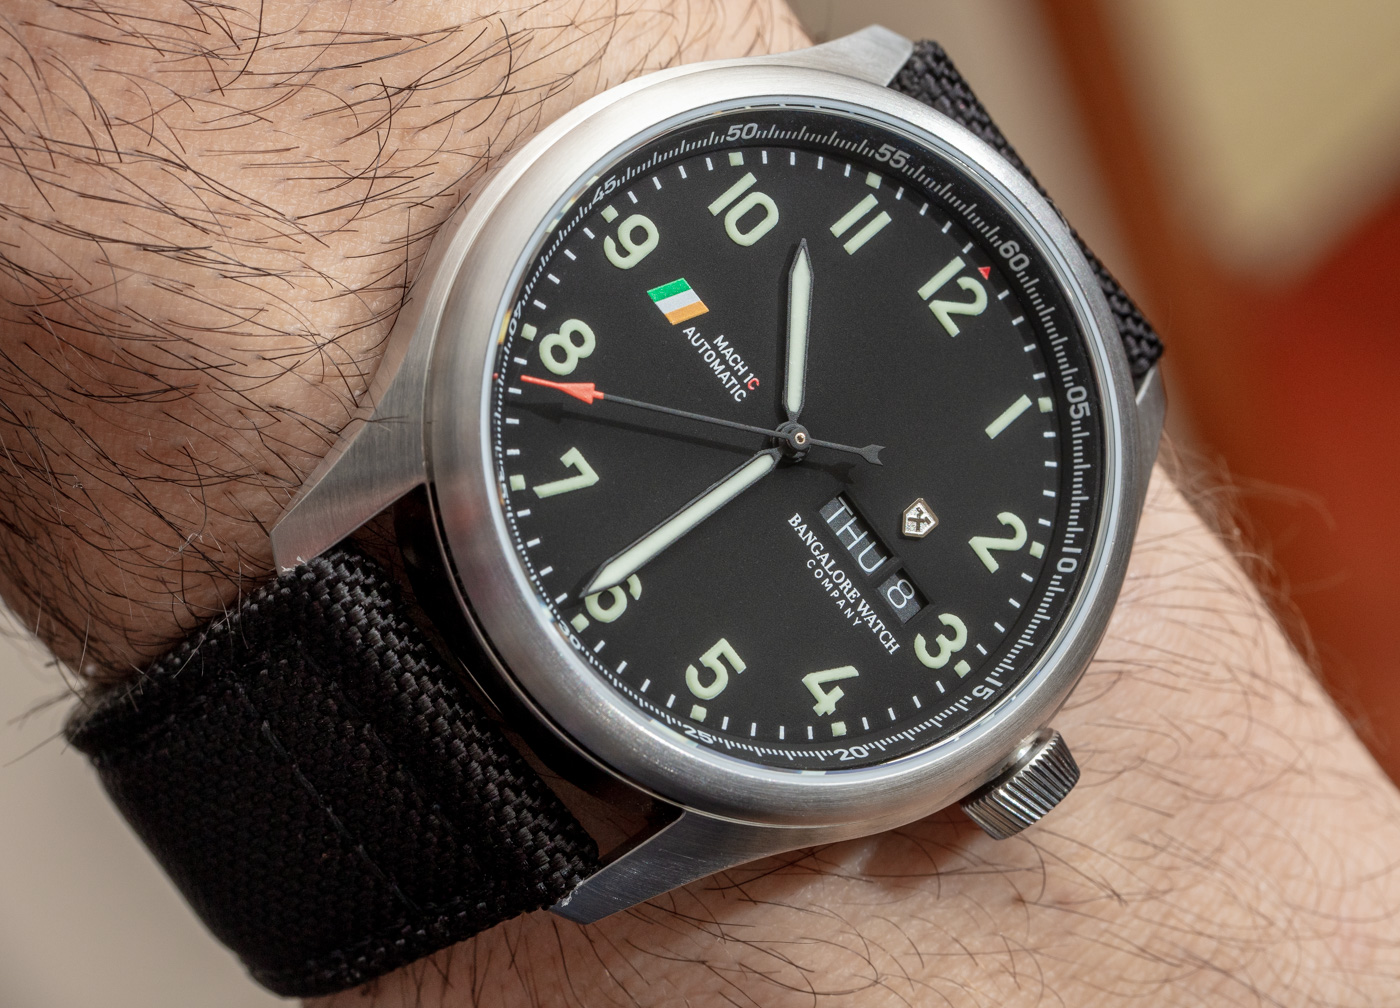 Bangalore Watch Company MACH 1 Indian Air Force-Inspired Watches Review aBlogtoWatch